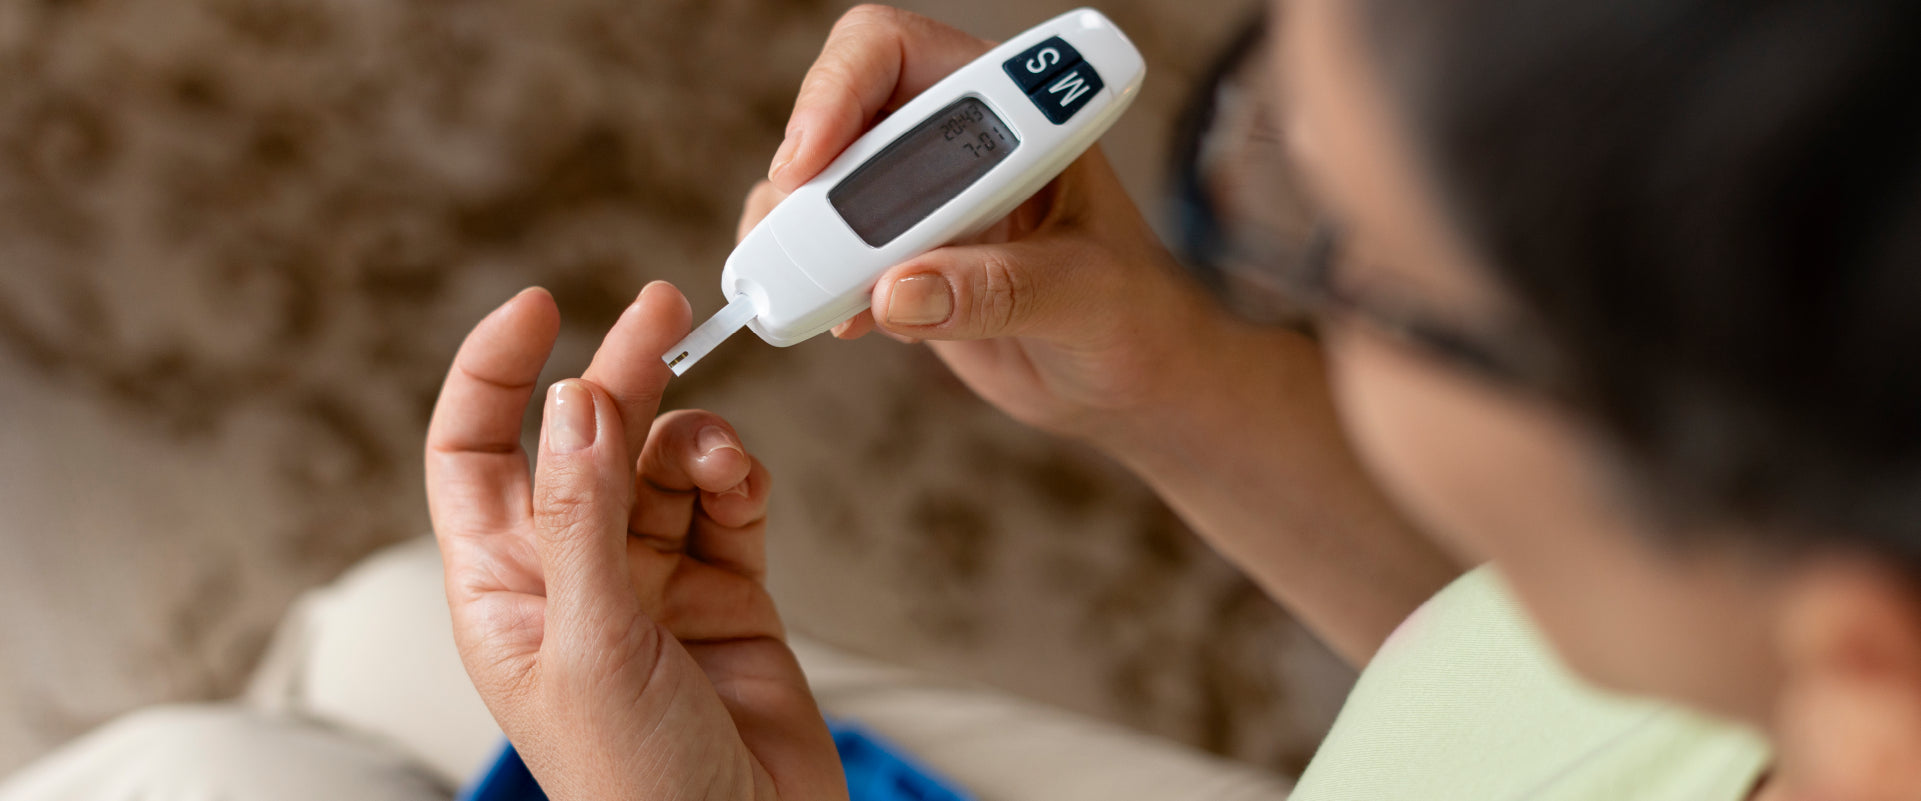 Diabetes Management by Targeting The Sneaky Causes